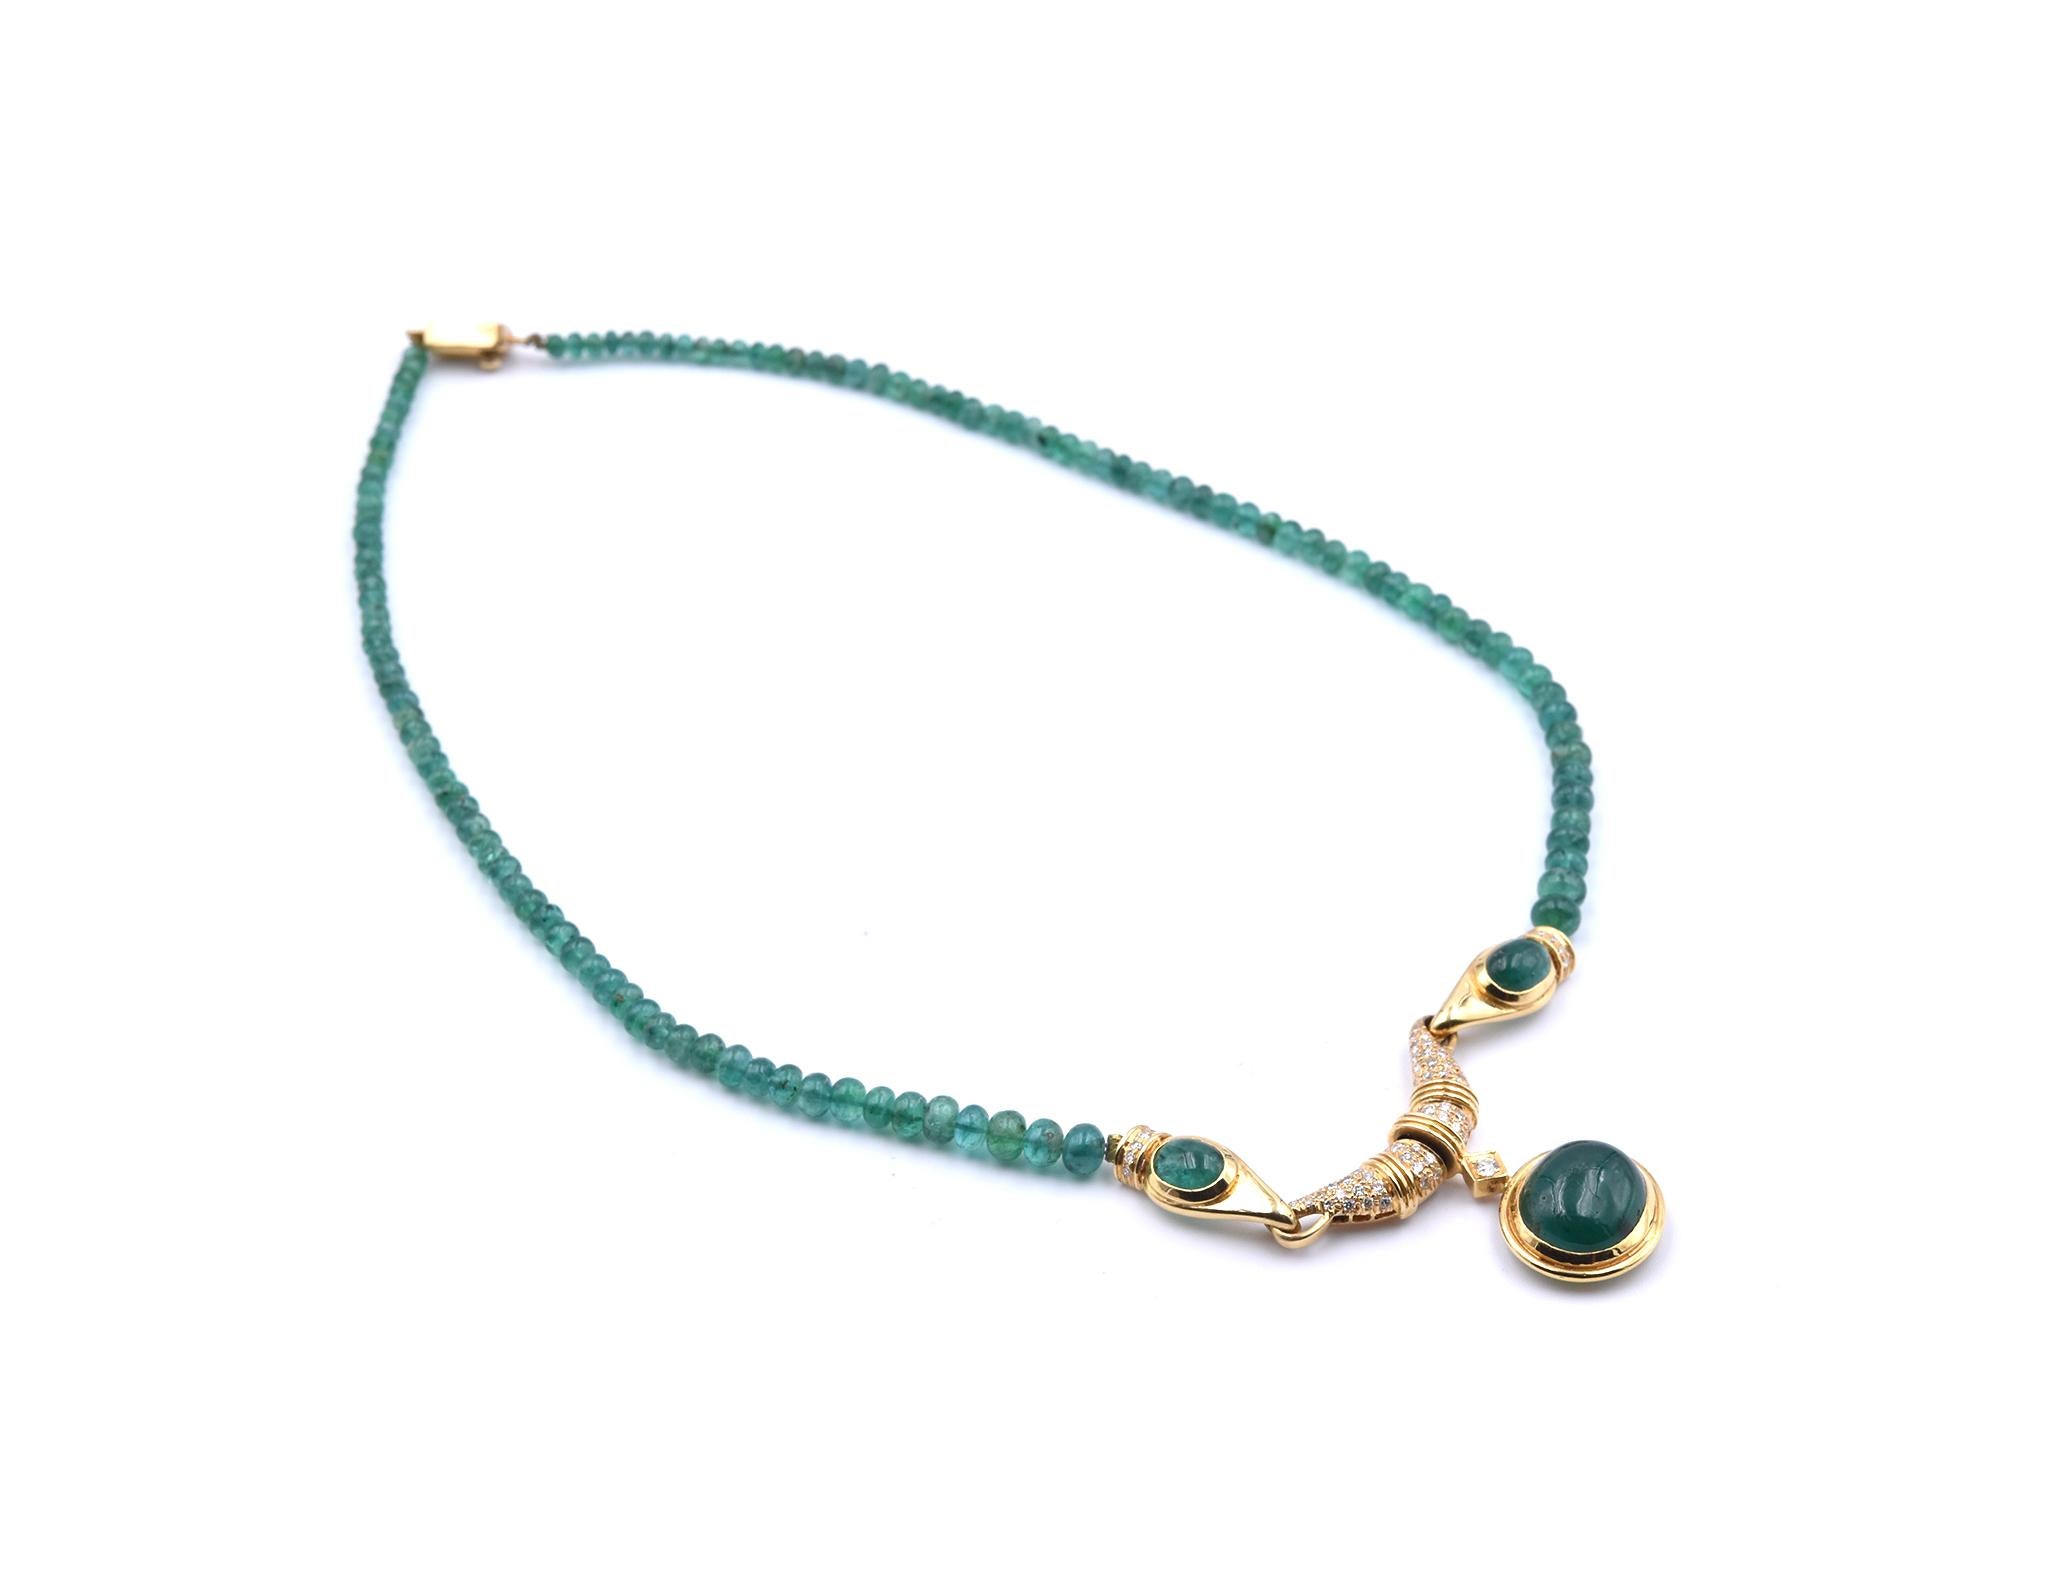 Designer: custom design
Material: 18k yellow gold
Diamonds:  round brilliant cut= .37cttw
Color: H
Clarity: SI1
Dimensions: necklace is 18-inches long, emerald pendant drop is ¾-inch long and it is 17.48mm wide
Weight: 18.00 grams